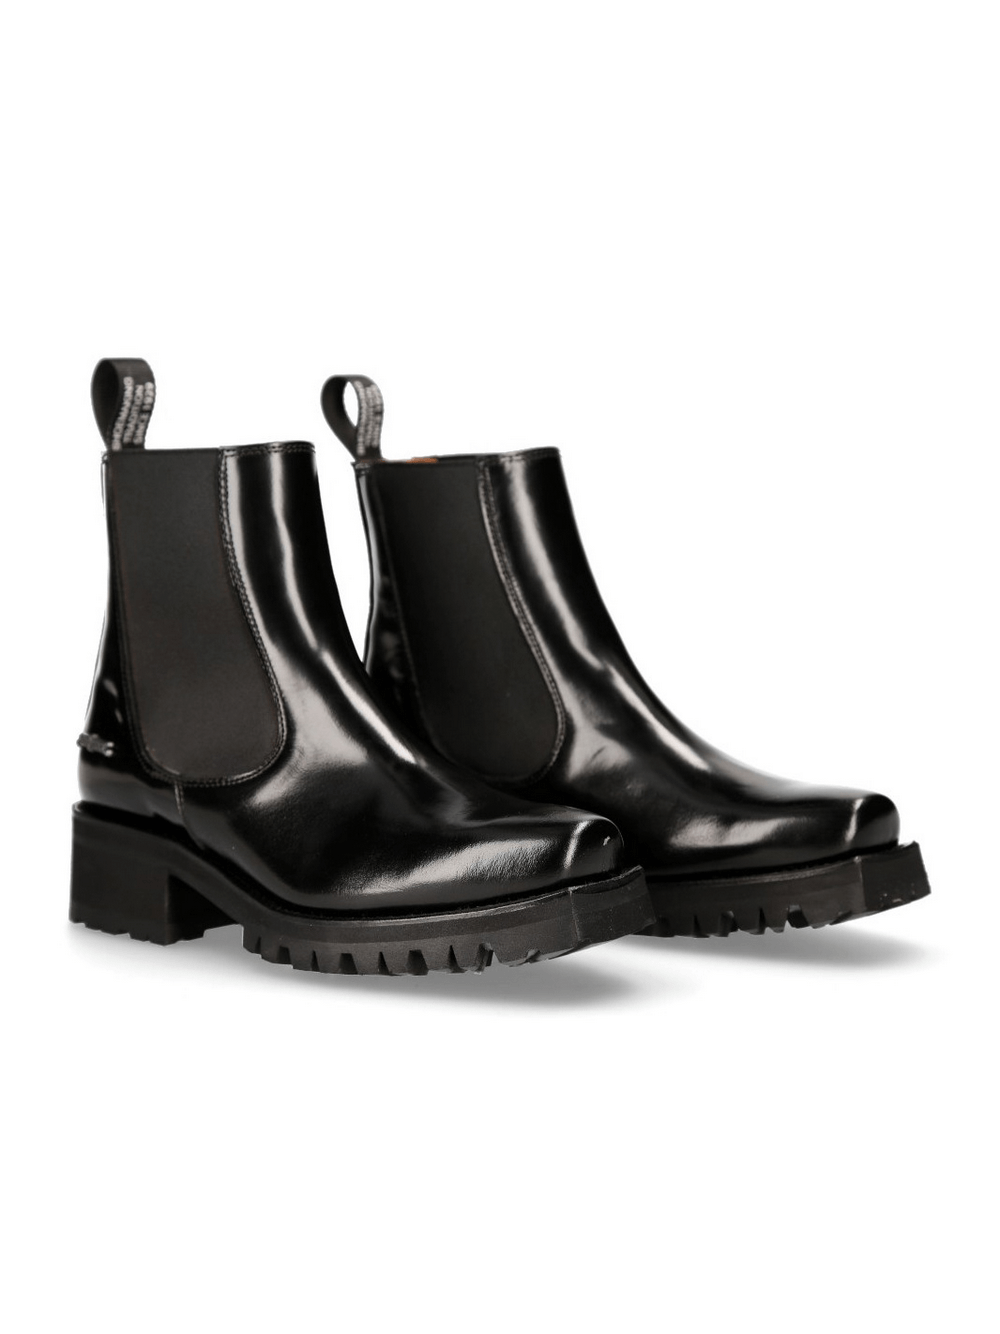 NEW ROCK Stylish Ankle Chelsea Boots with Elastic Gores